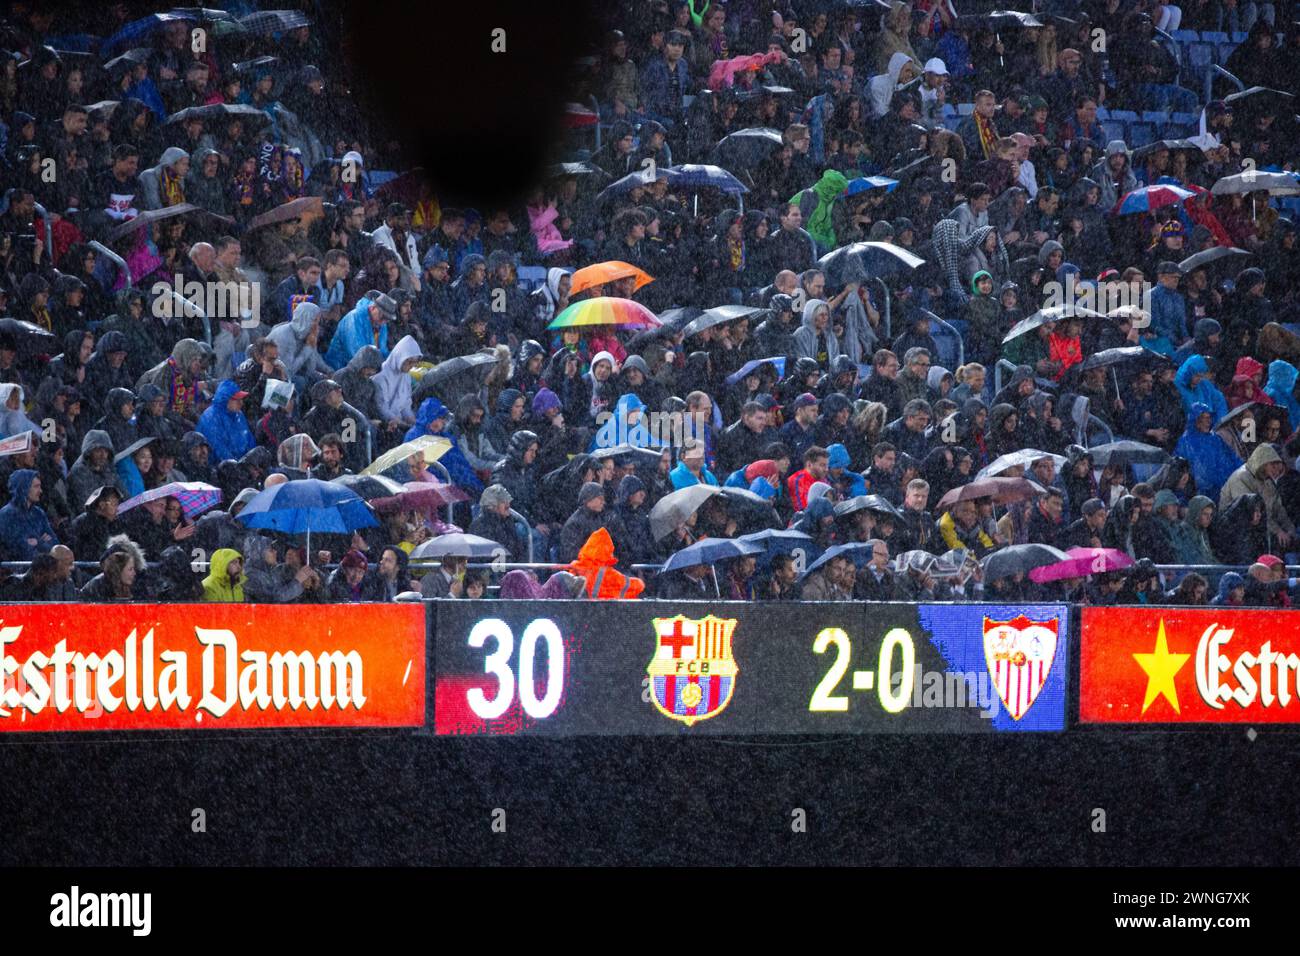 UMBRELLAS, SCOREBOARD, FANS, BARCELONA FC, 2019: Barcelona fans at Camp Nou celebrate an easy win over a title rival. The home team lead 2-0 after 30 minutes. Barcelona FC v Sevilla FC at Camp Nou, Barcelona on 5 April 2017. Photo: Rob Watkins. Barca won the game 3-0 with three goals in the first 33 minutes. The game was played in a deluge of rain during a massive storm. Stock Photo